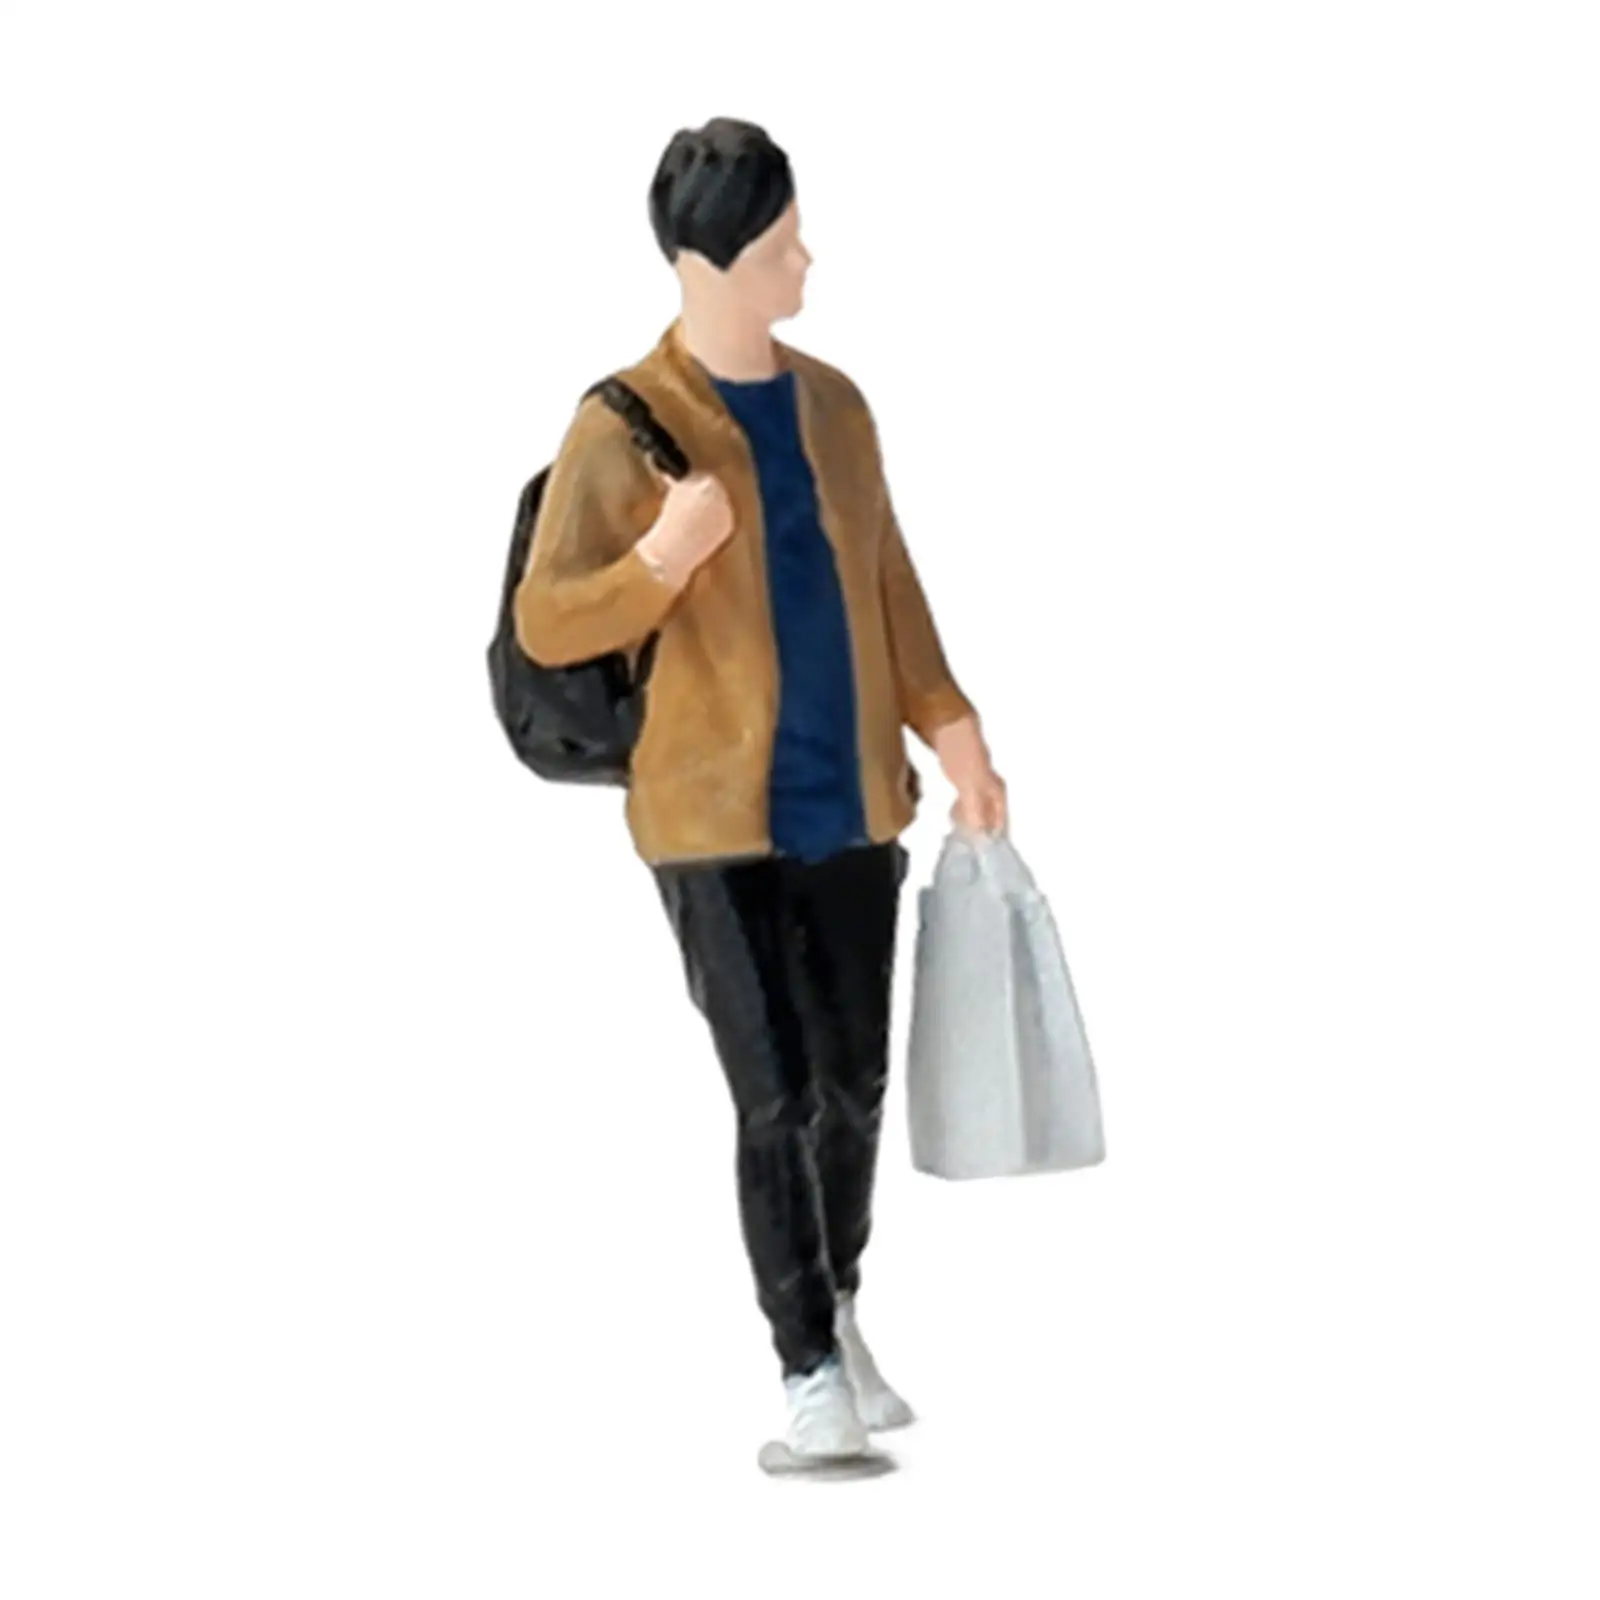 Simulation Diorama Street Character Figure Collectibles Desk Decoration Tiny People Model with for Diorama Miniature Scene Decor